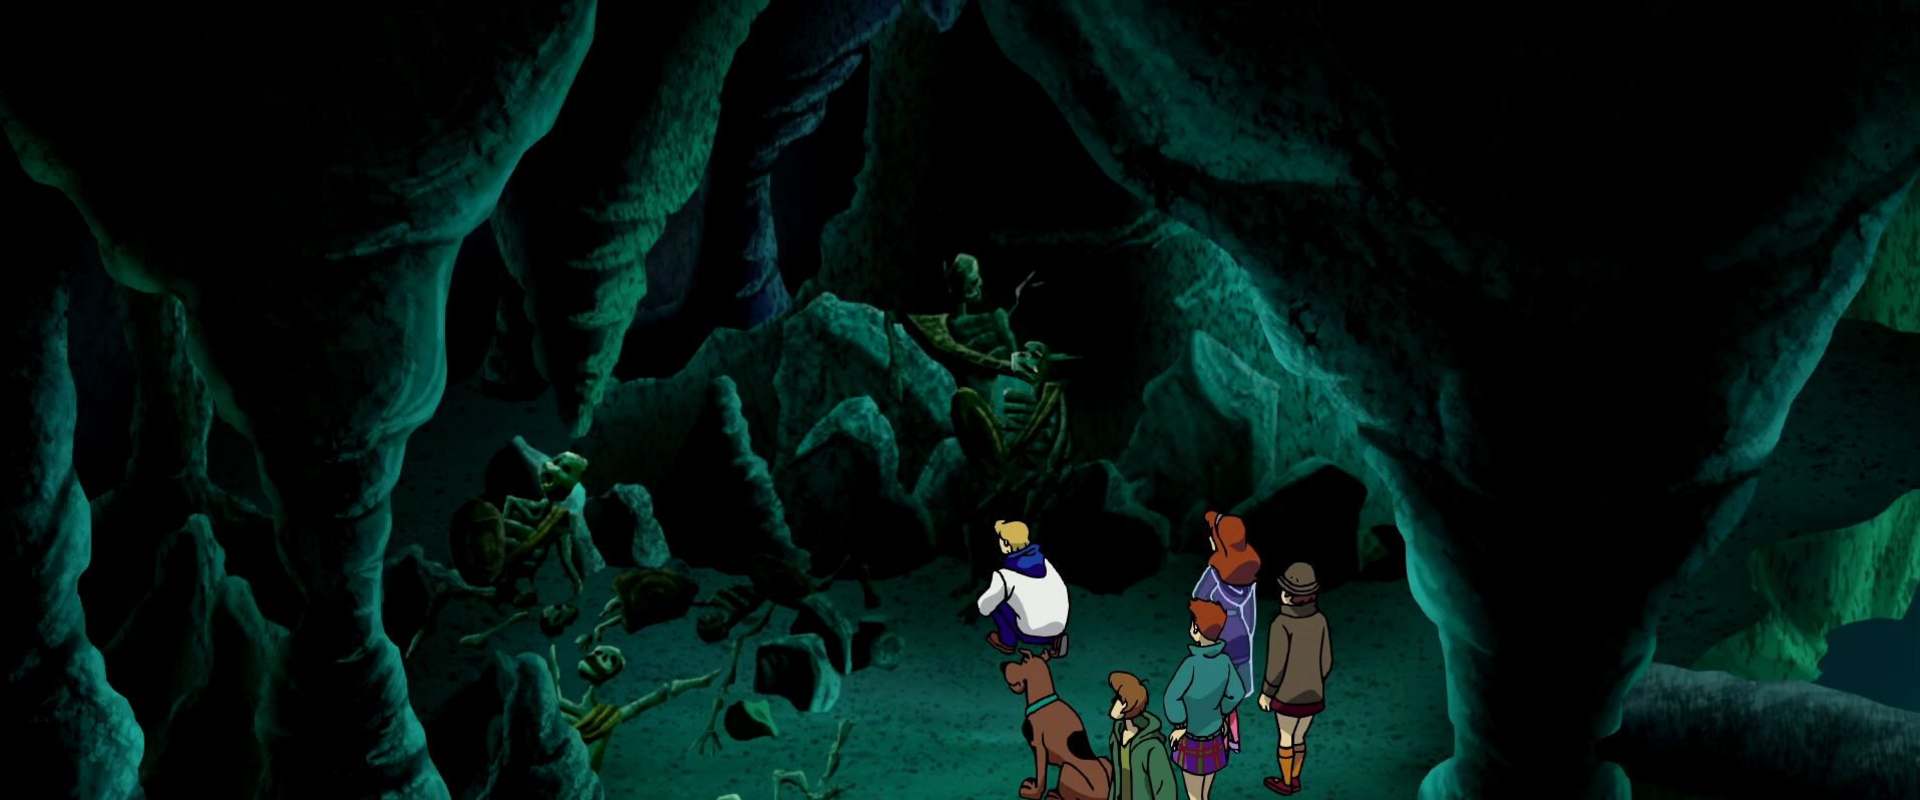 Scooby-Doo! and the Loch Ness Monster background 2